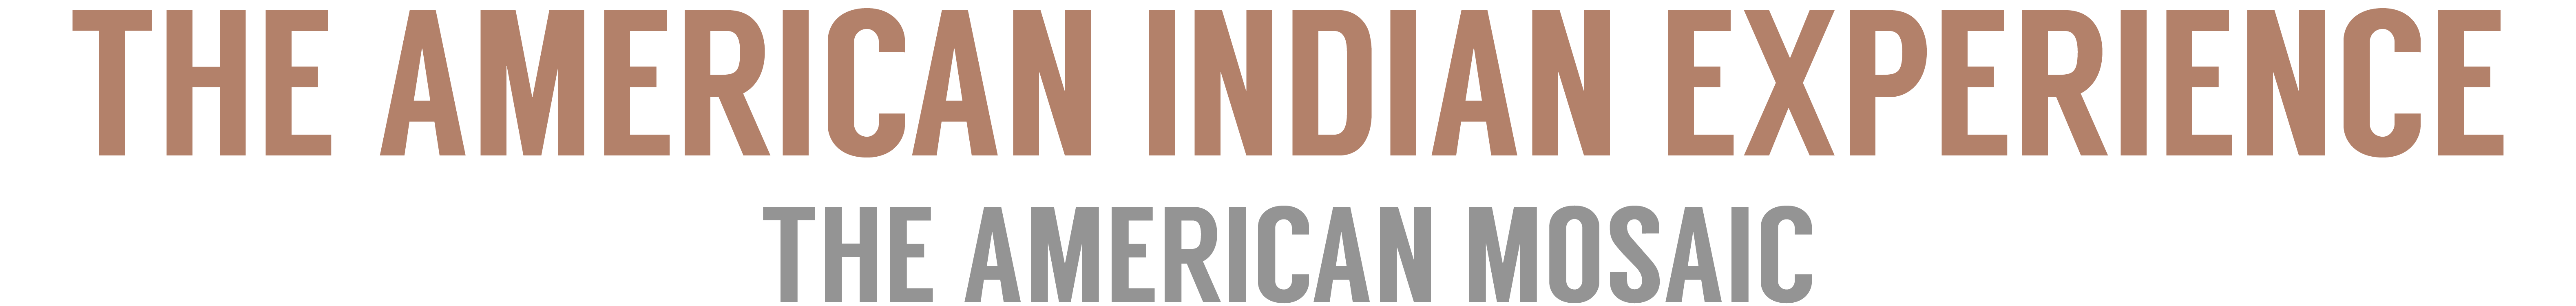 ABC-CLIO Solutions - The American Mosaic: The American Indian Experience